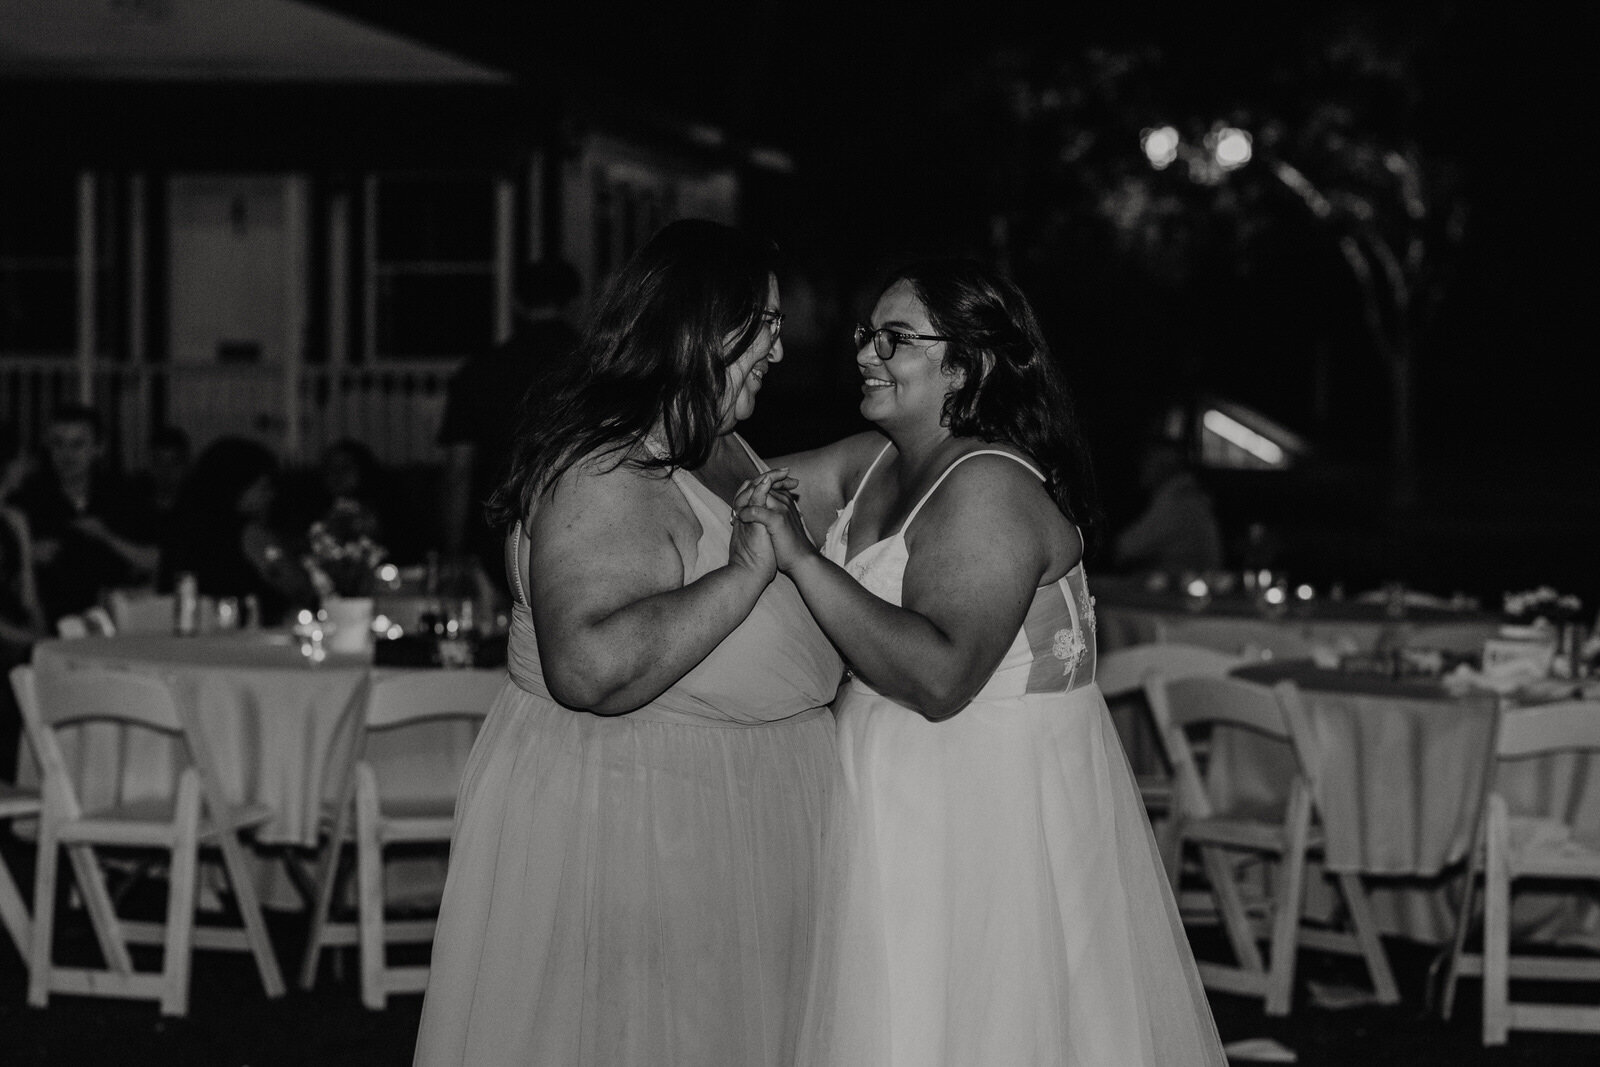 Mom and daughter dance at Heritage Park wedding reception